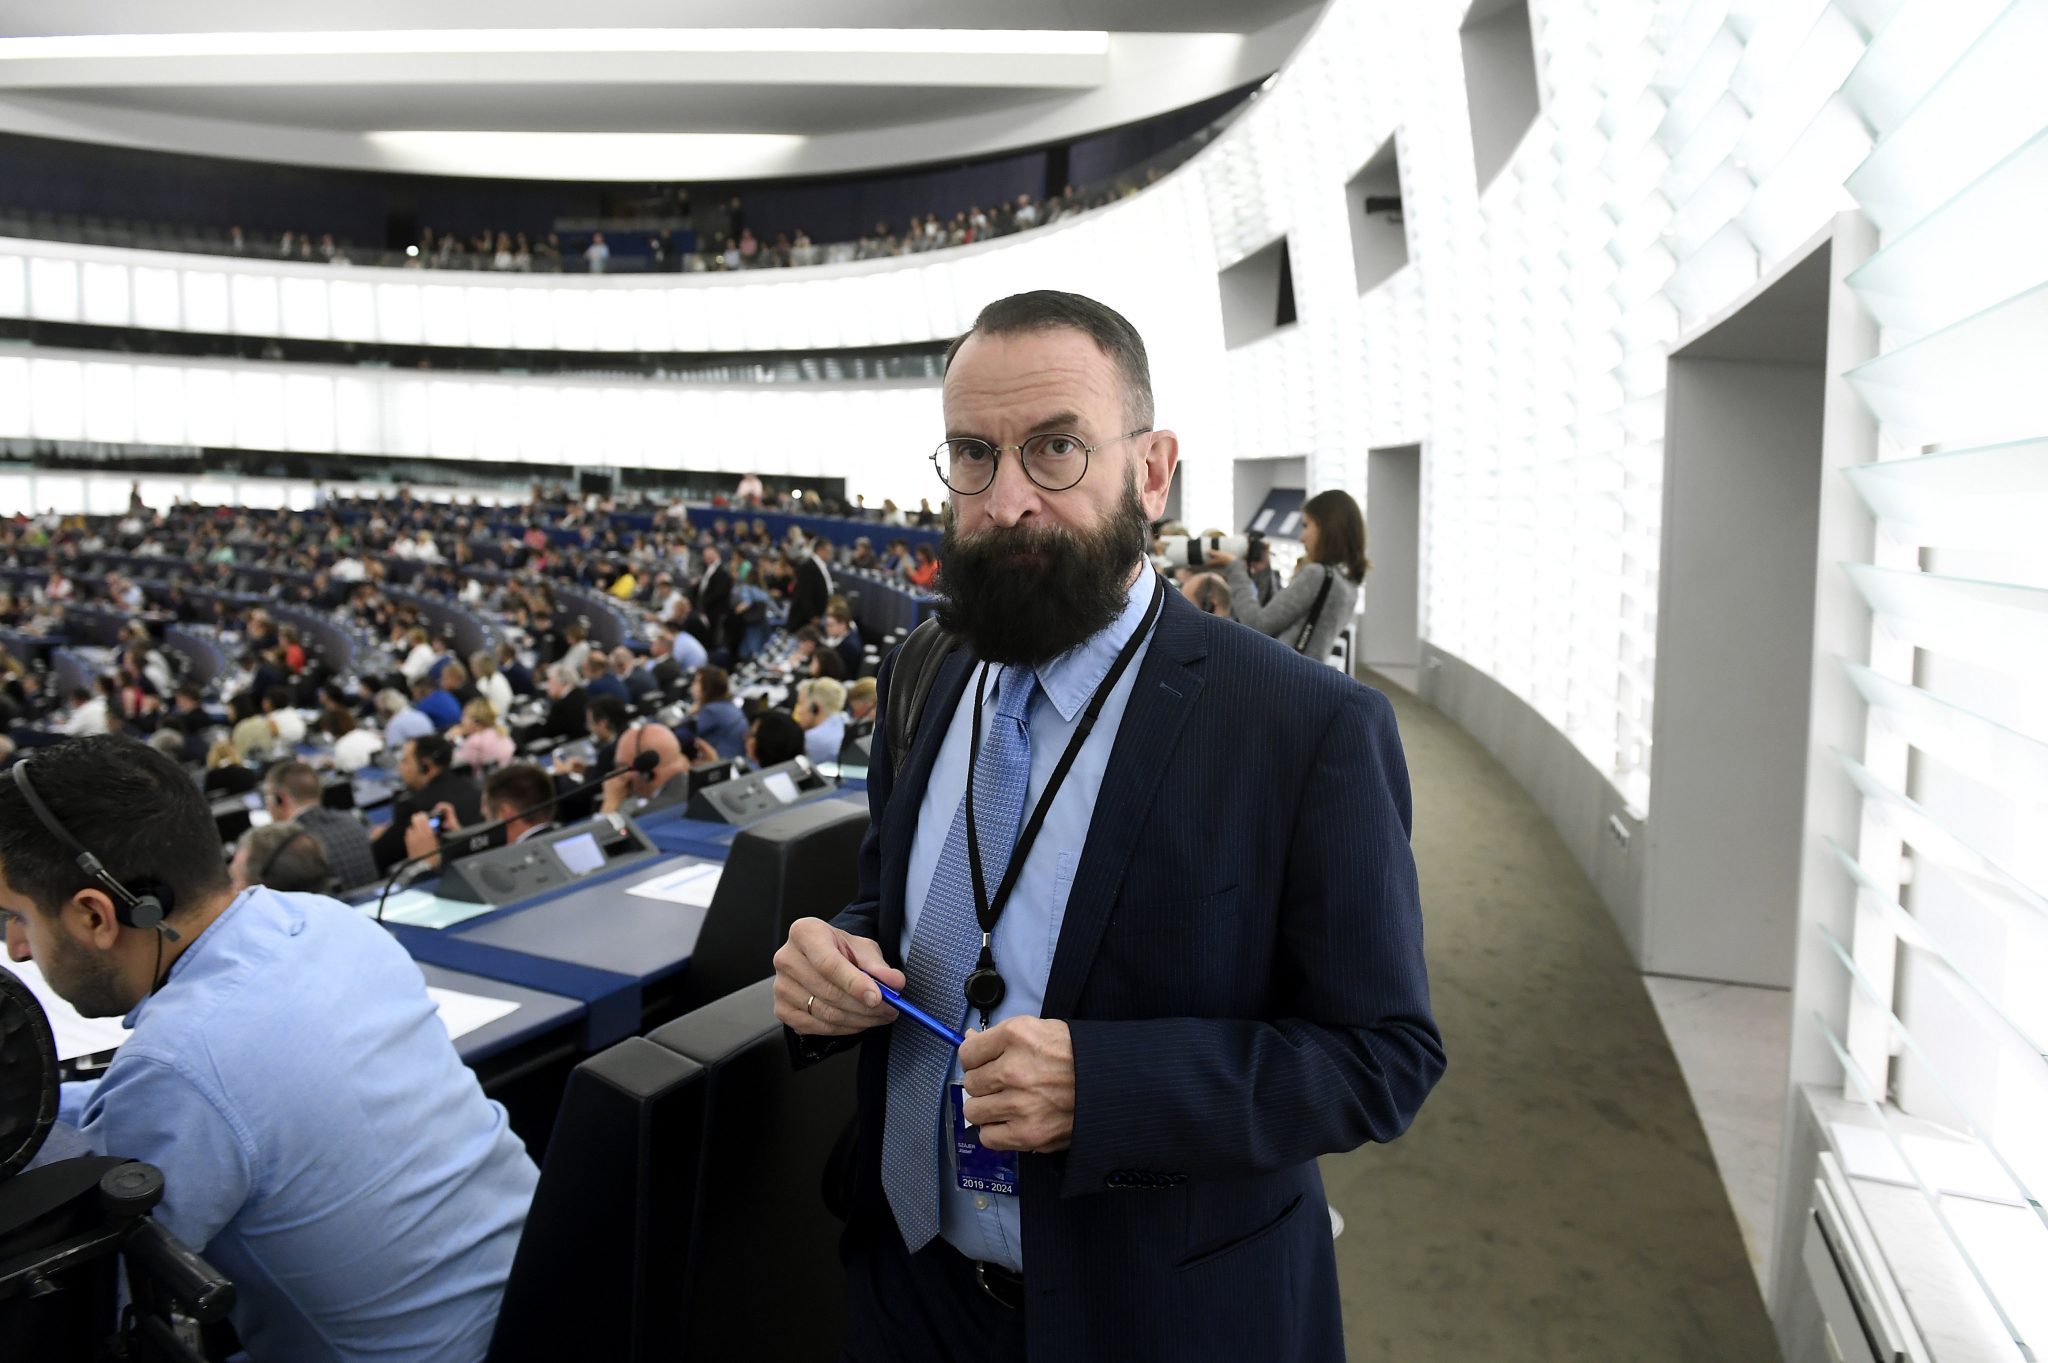 Nat'l Security Comm.: Information Office Knew Nothing about MEP Szájer's Case